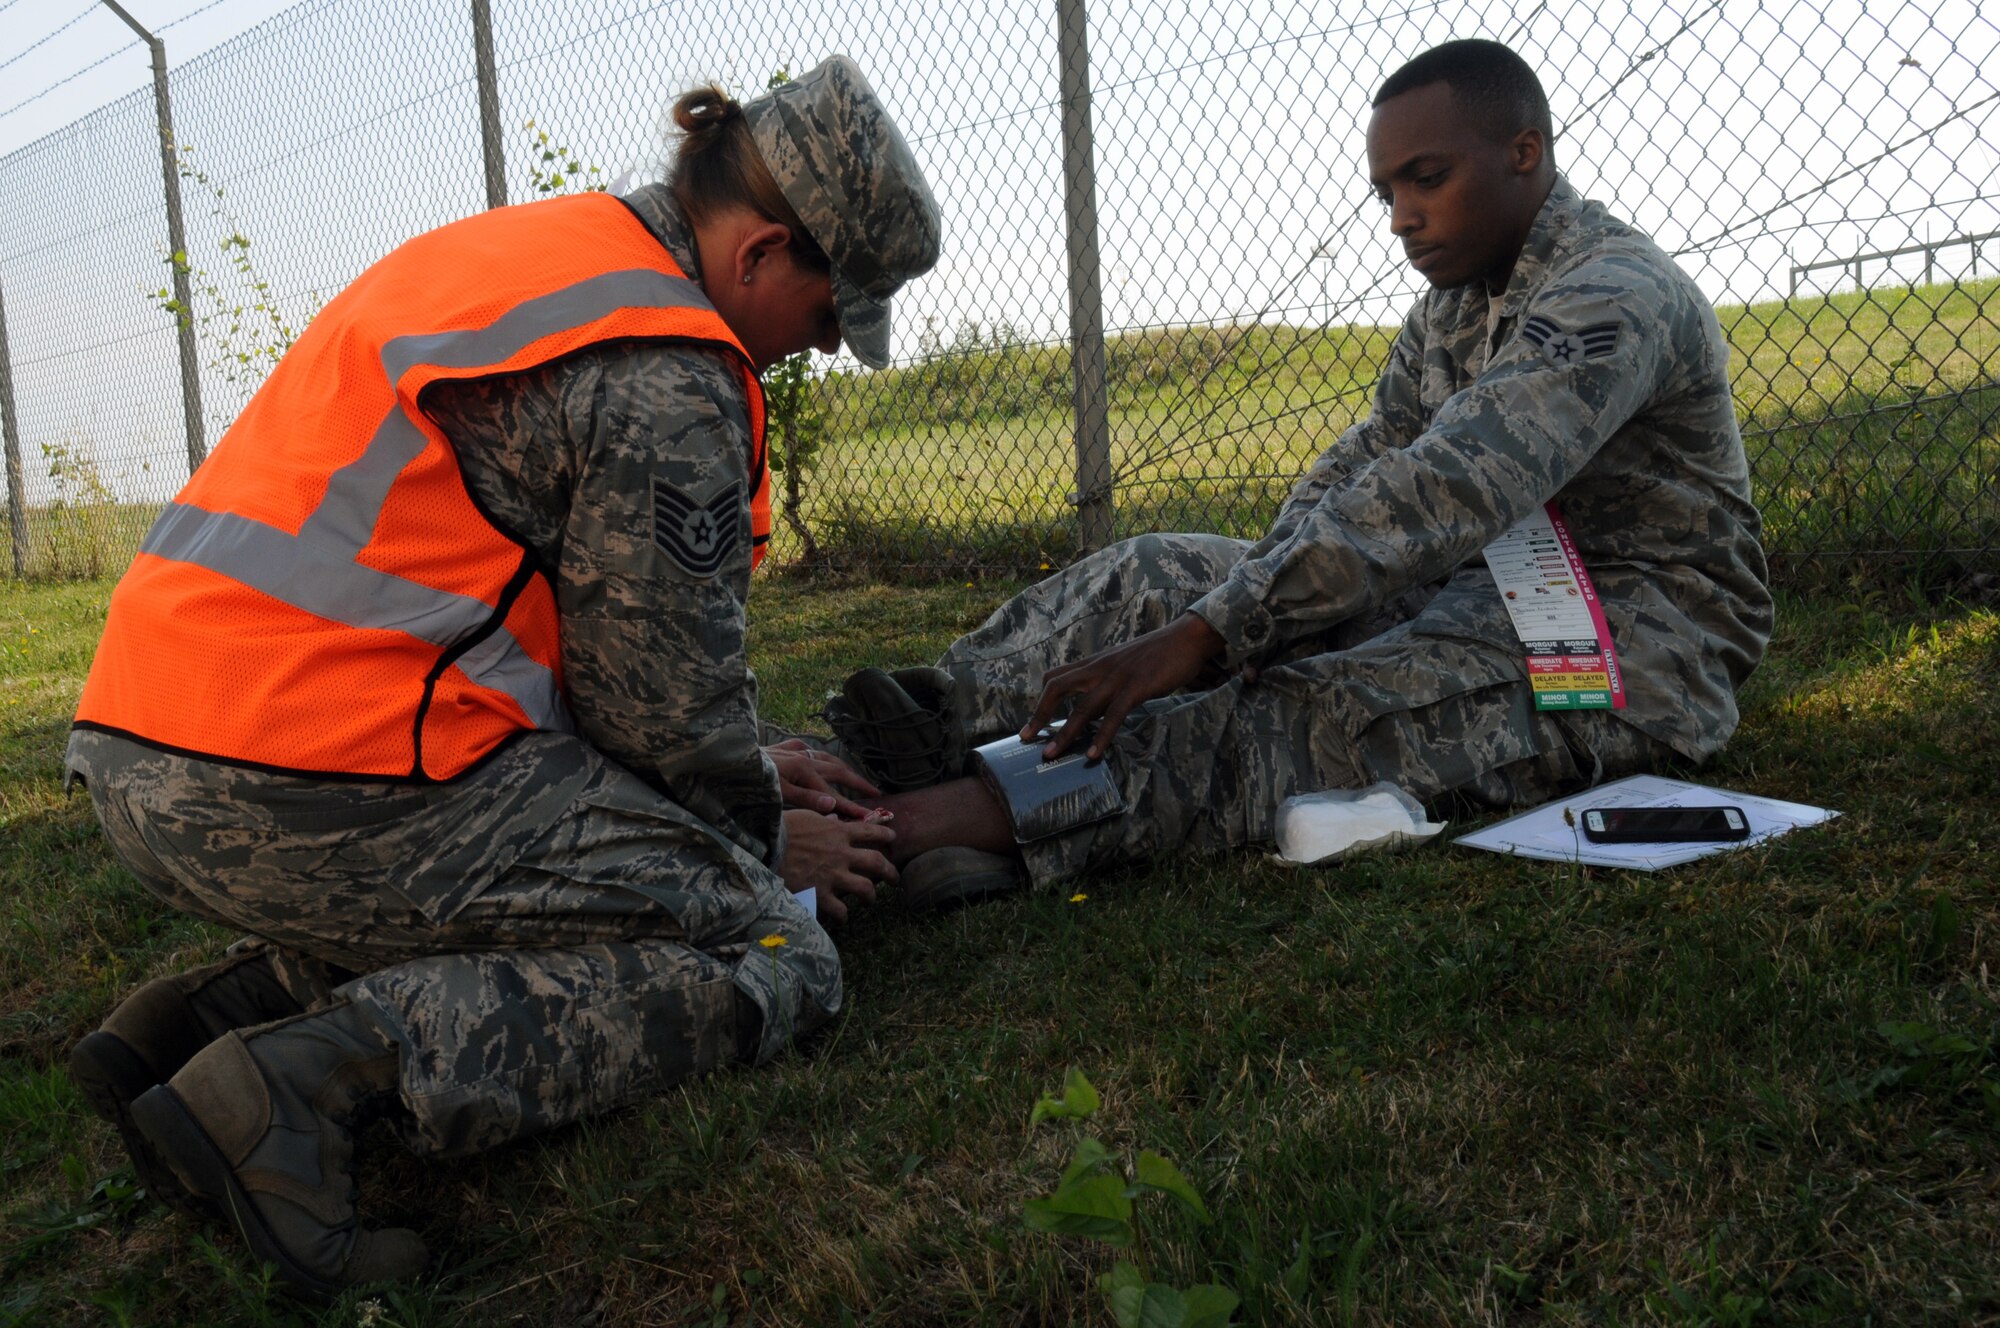 A picture of U.S. Air Force Tech. Sgt. Melissa Blackledge, an aerospace medical technician from the New Jersey Air National Guard's 177th Medical Group, assisting a mock patient with a broken ankle during a simulated fuel spill.